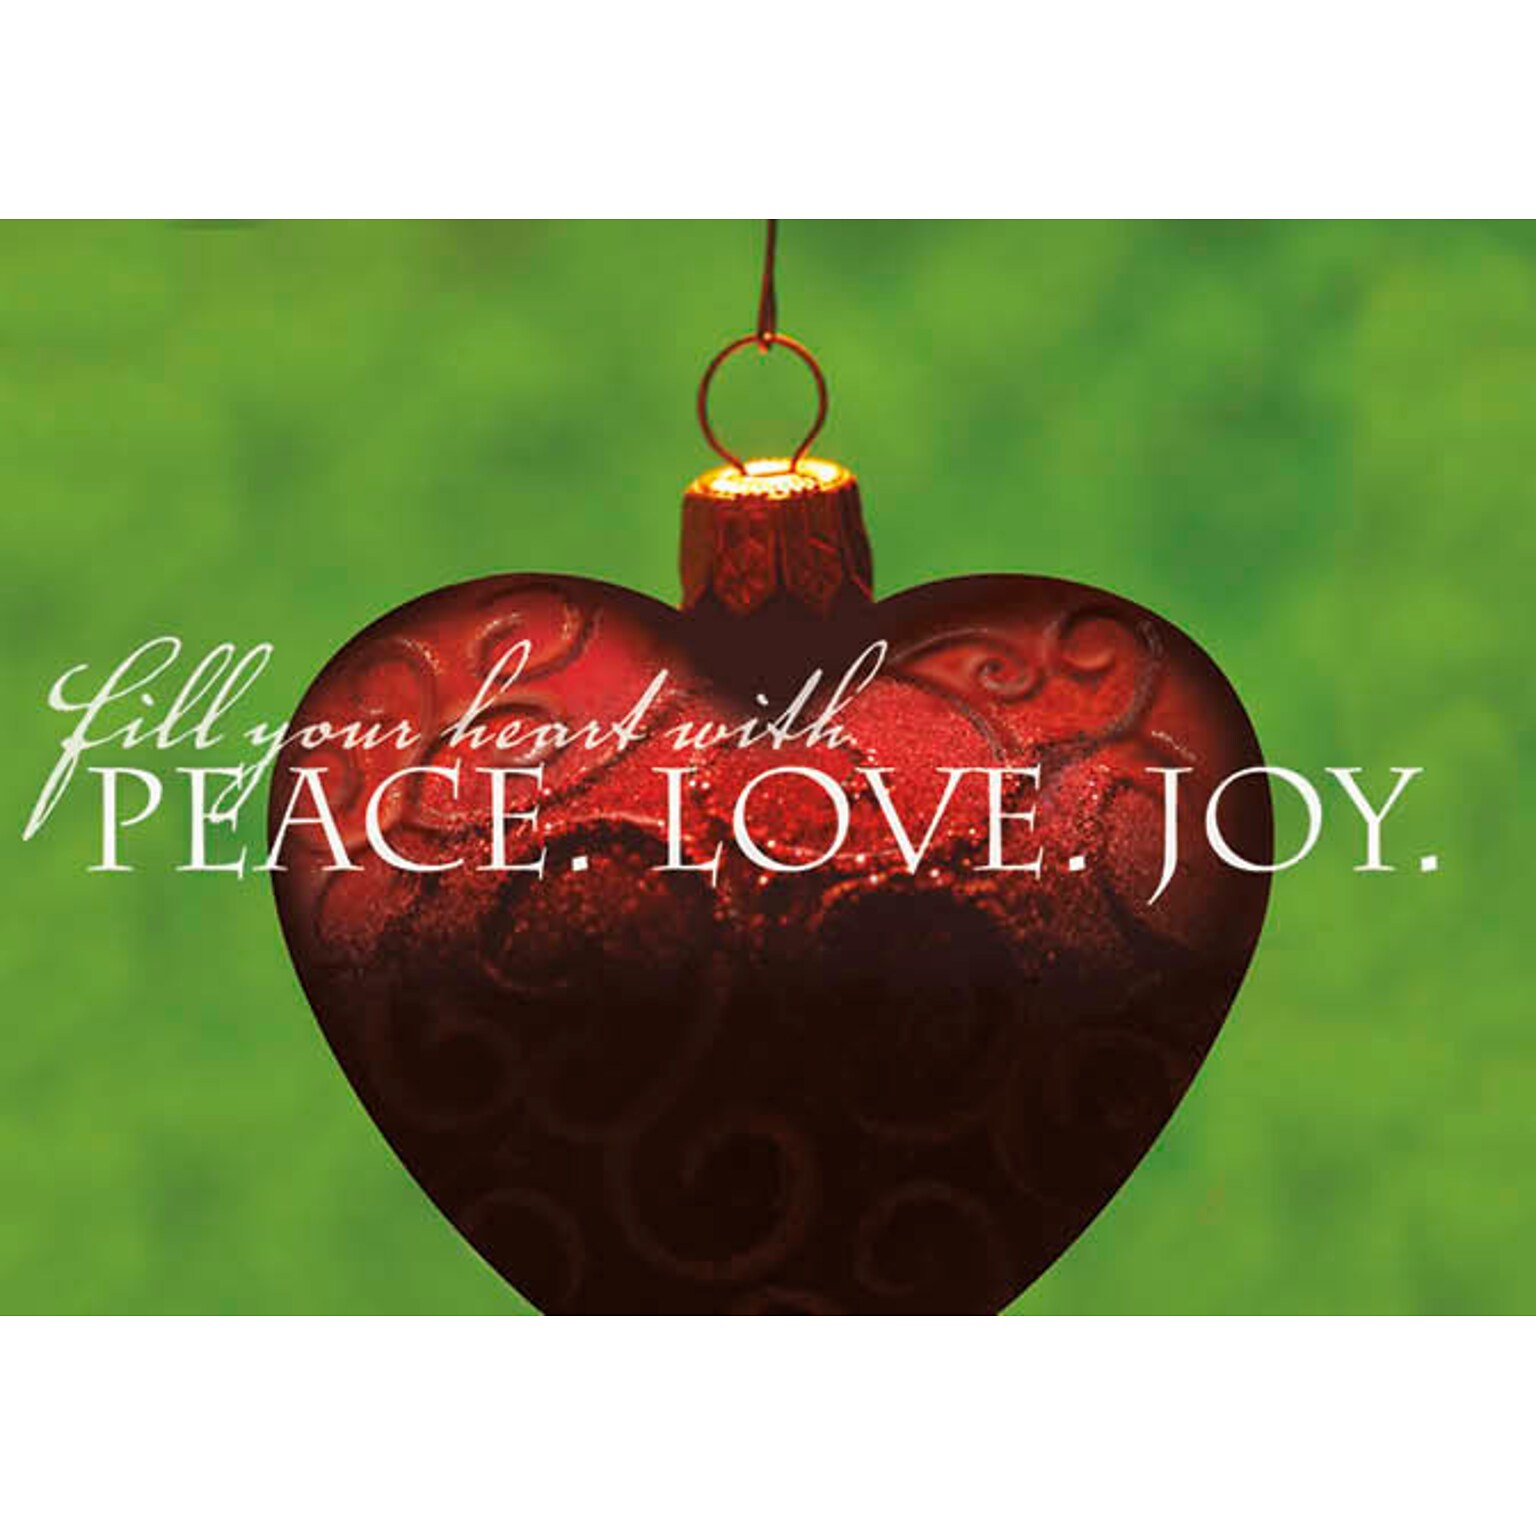 Fill Your Heart With Peace, Love , Joy Ornament Holiday Greeting Cards, With A7 Envelopes, 7 x 5, 25 Cards per Set